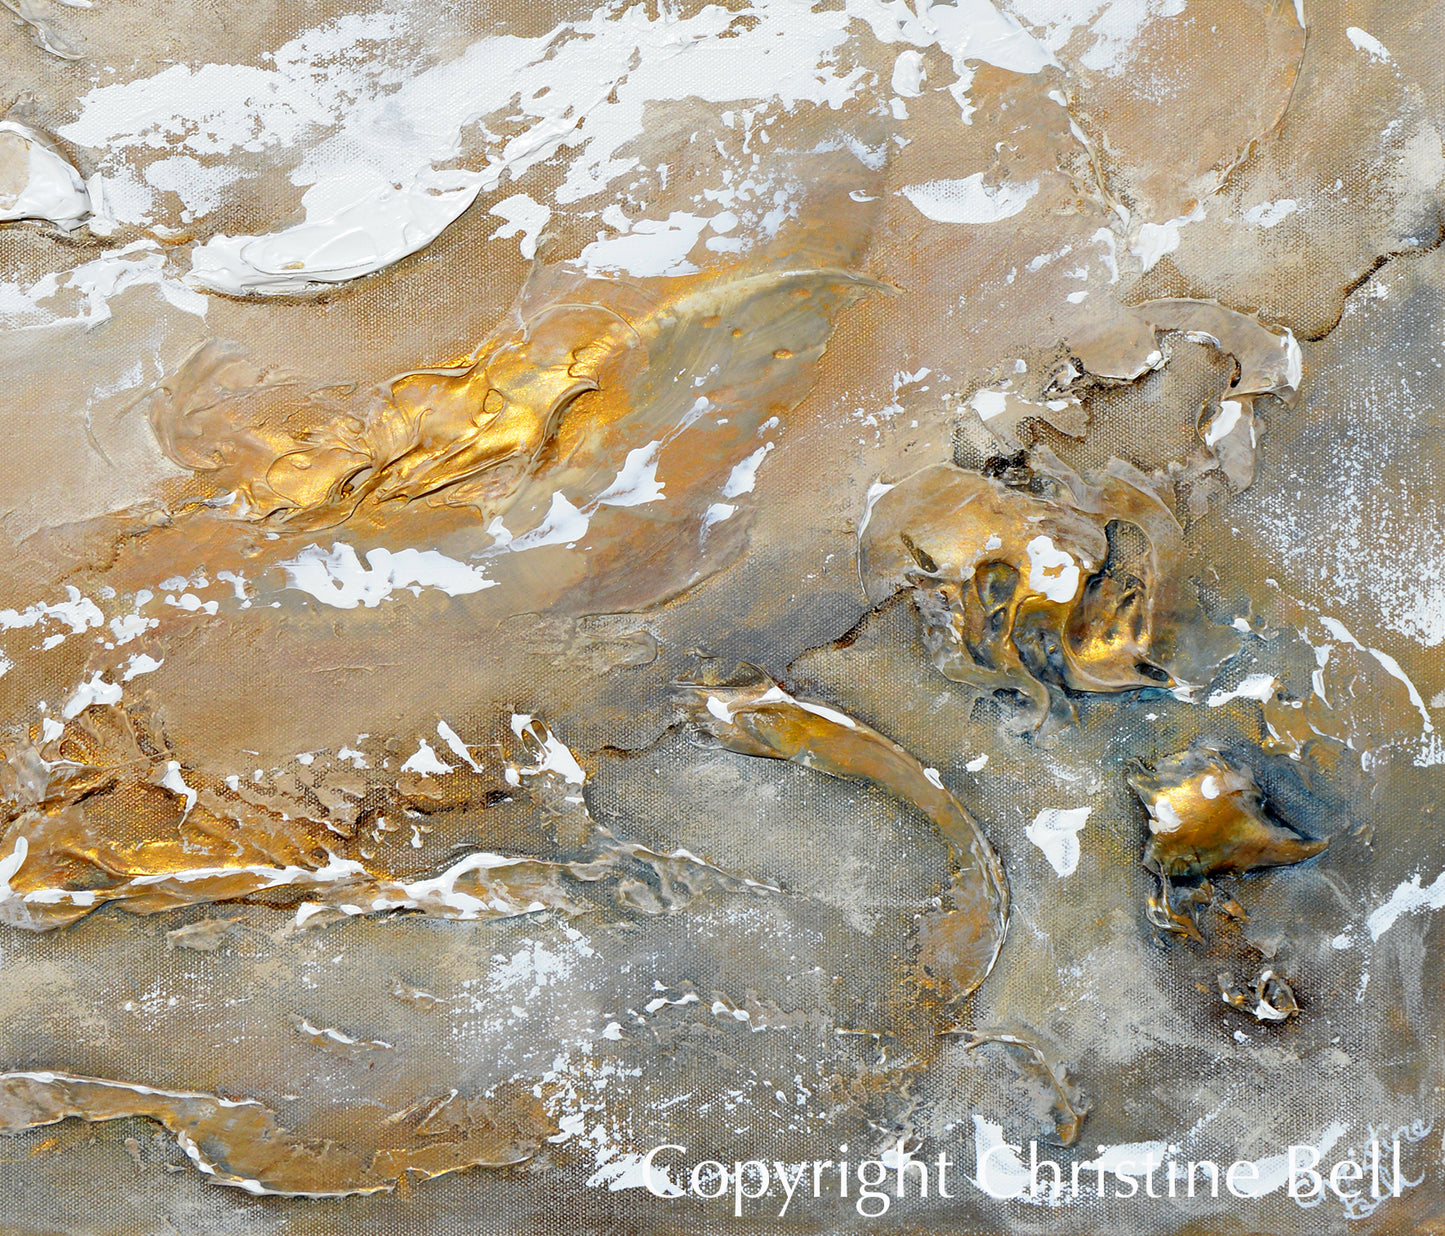 "Weathered the Storm" ORIGINAL Art Neutral Textured Coastal Abstract Painting White Beige Grey Taupe Gold 24x30"